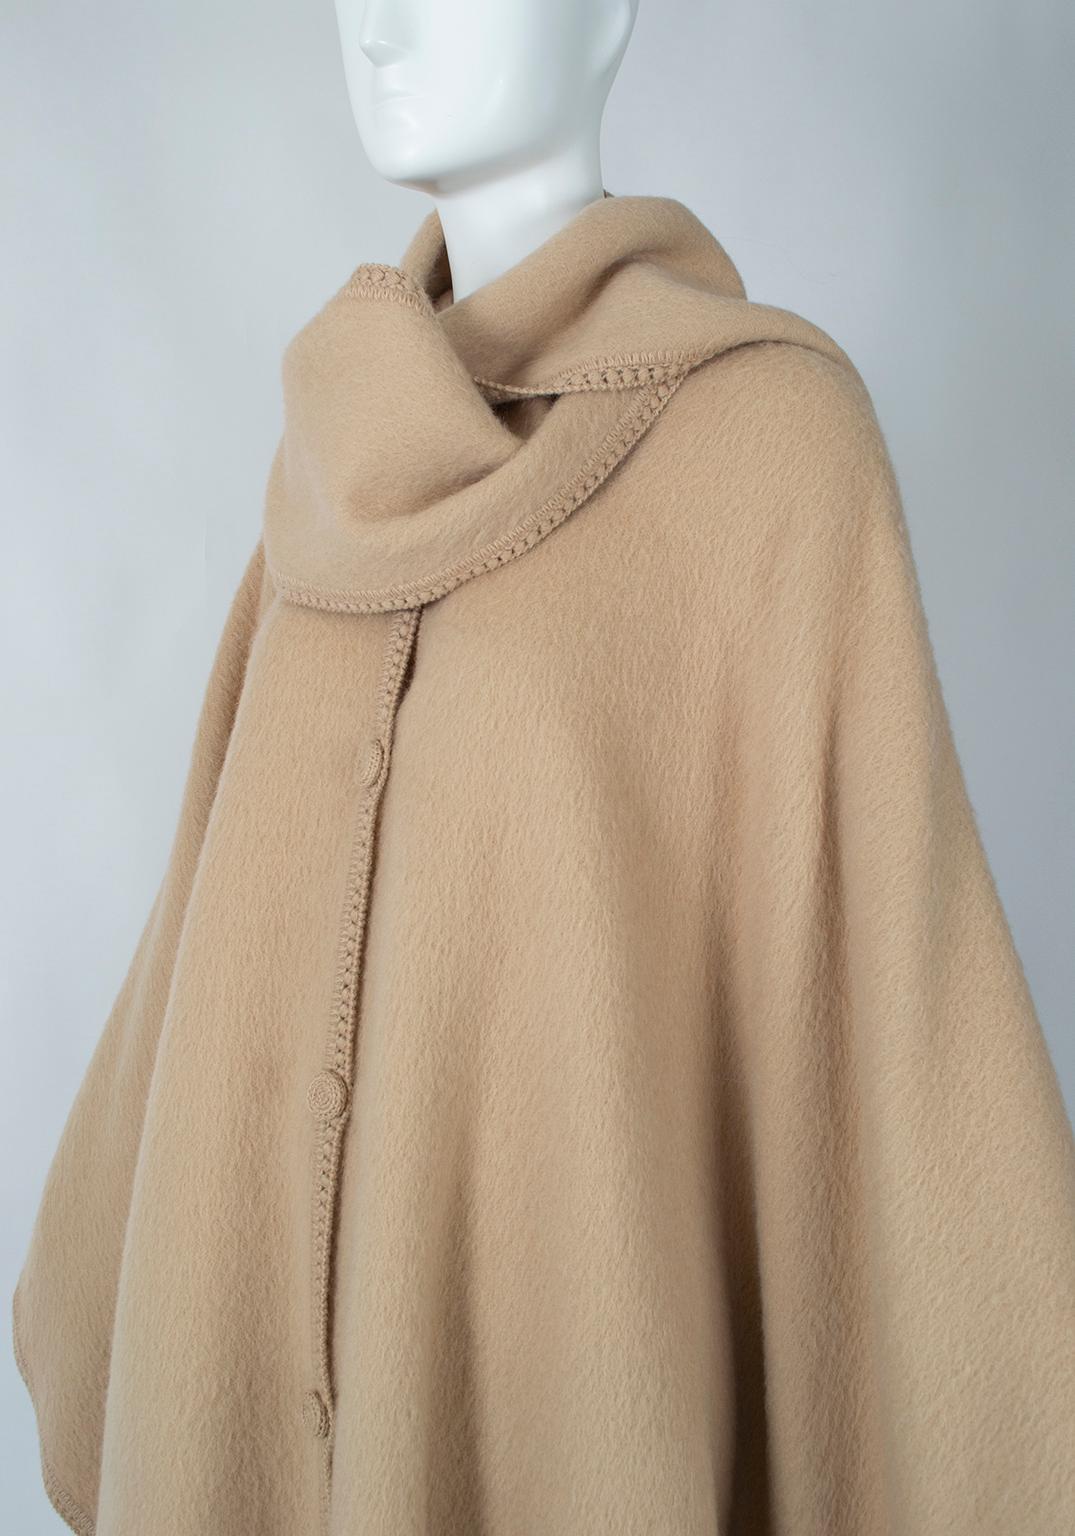 Camel Peruvian Alpaca Poncho with Attached Scarf, Jacome Estate - One Size, 1960 2